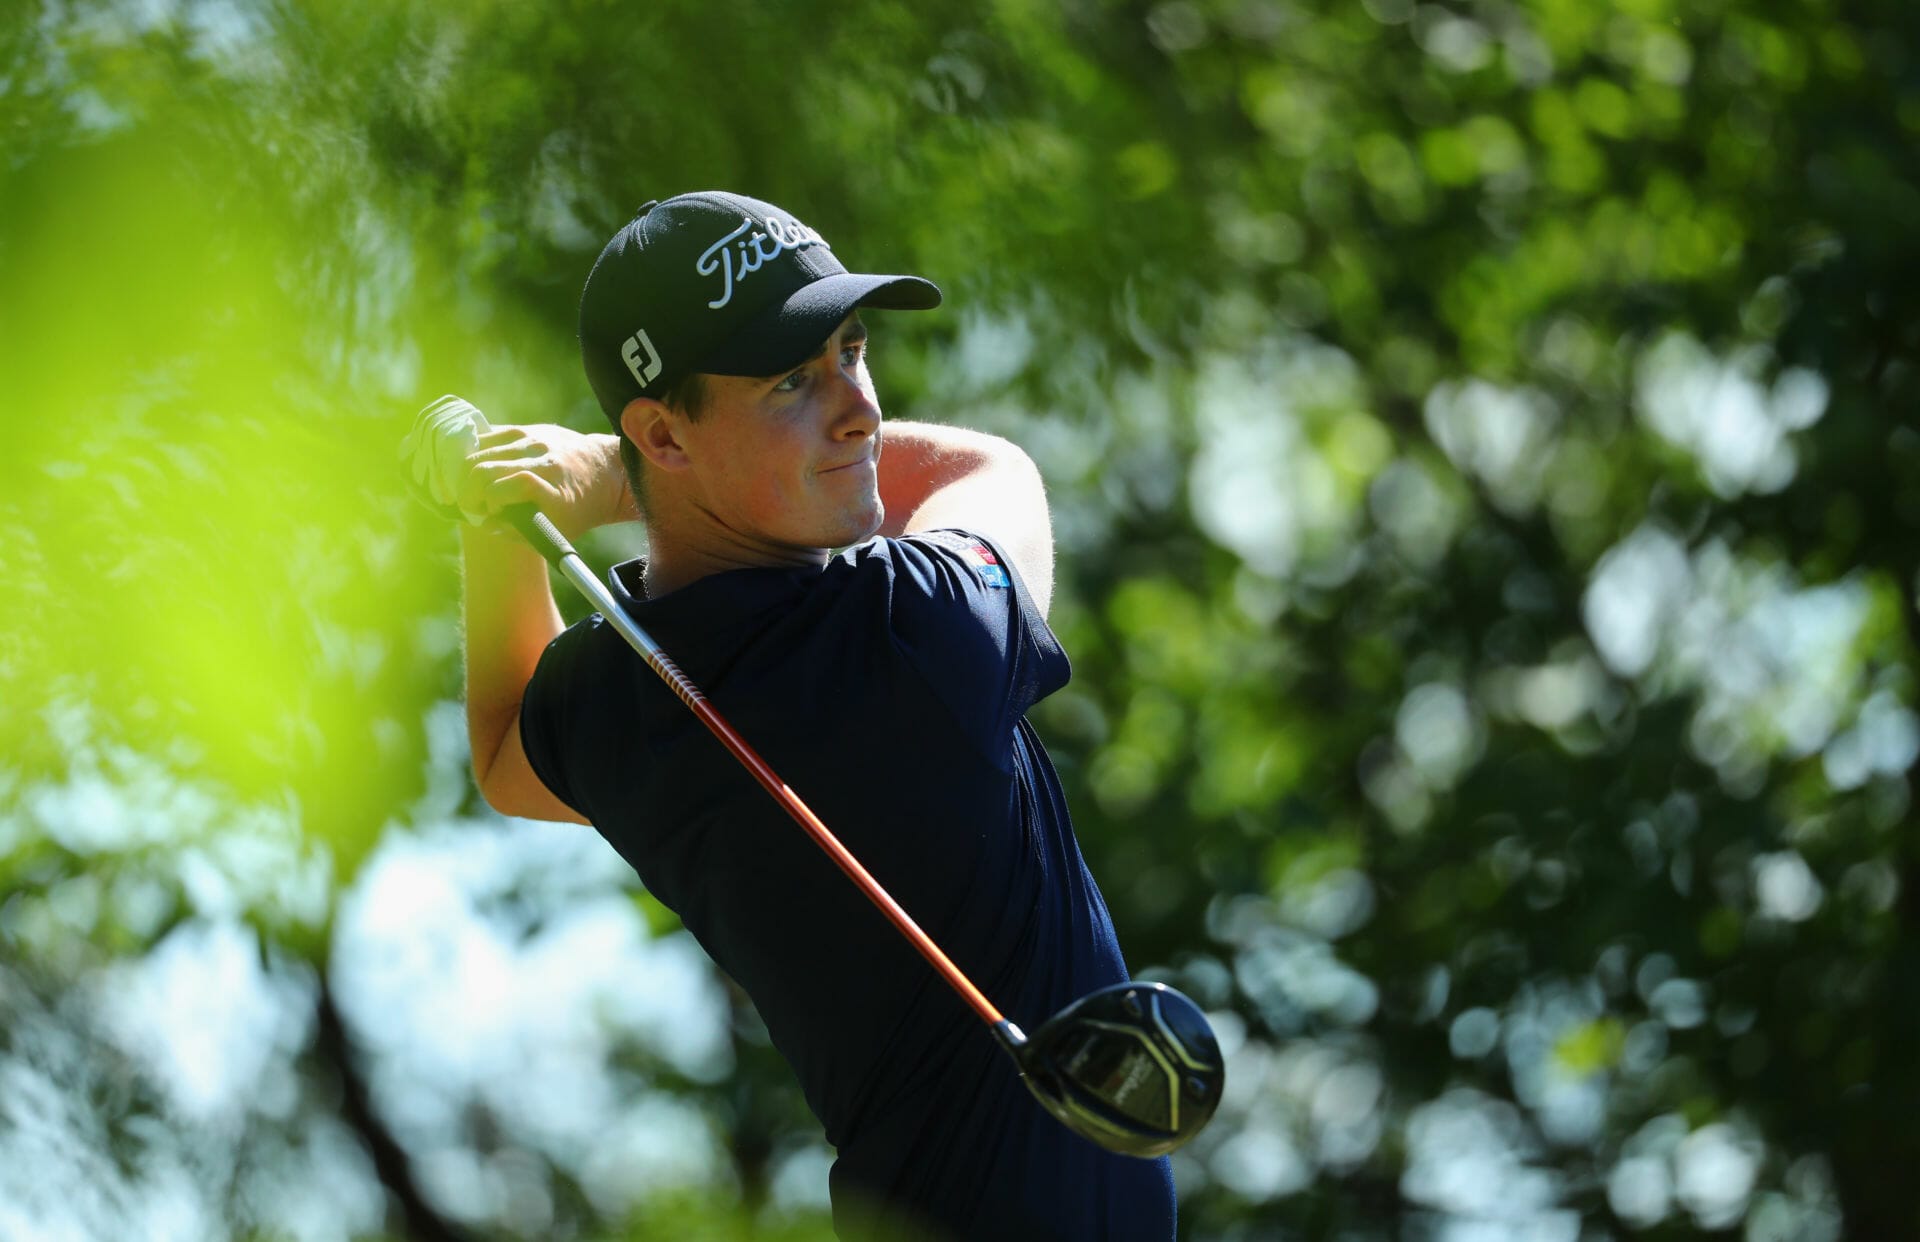 Hurley five back ahead of final round at Golf Nazionale